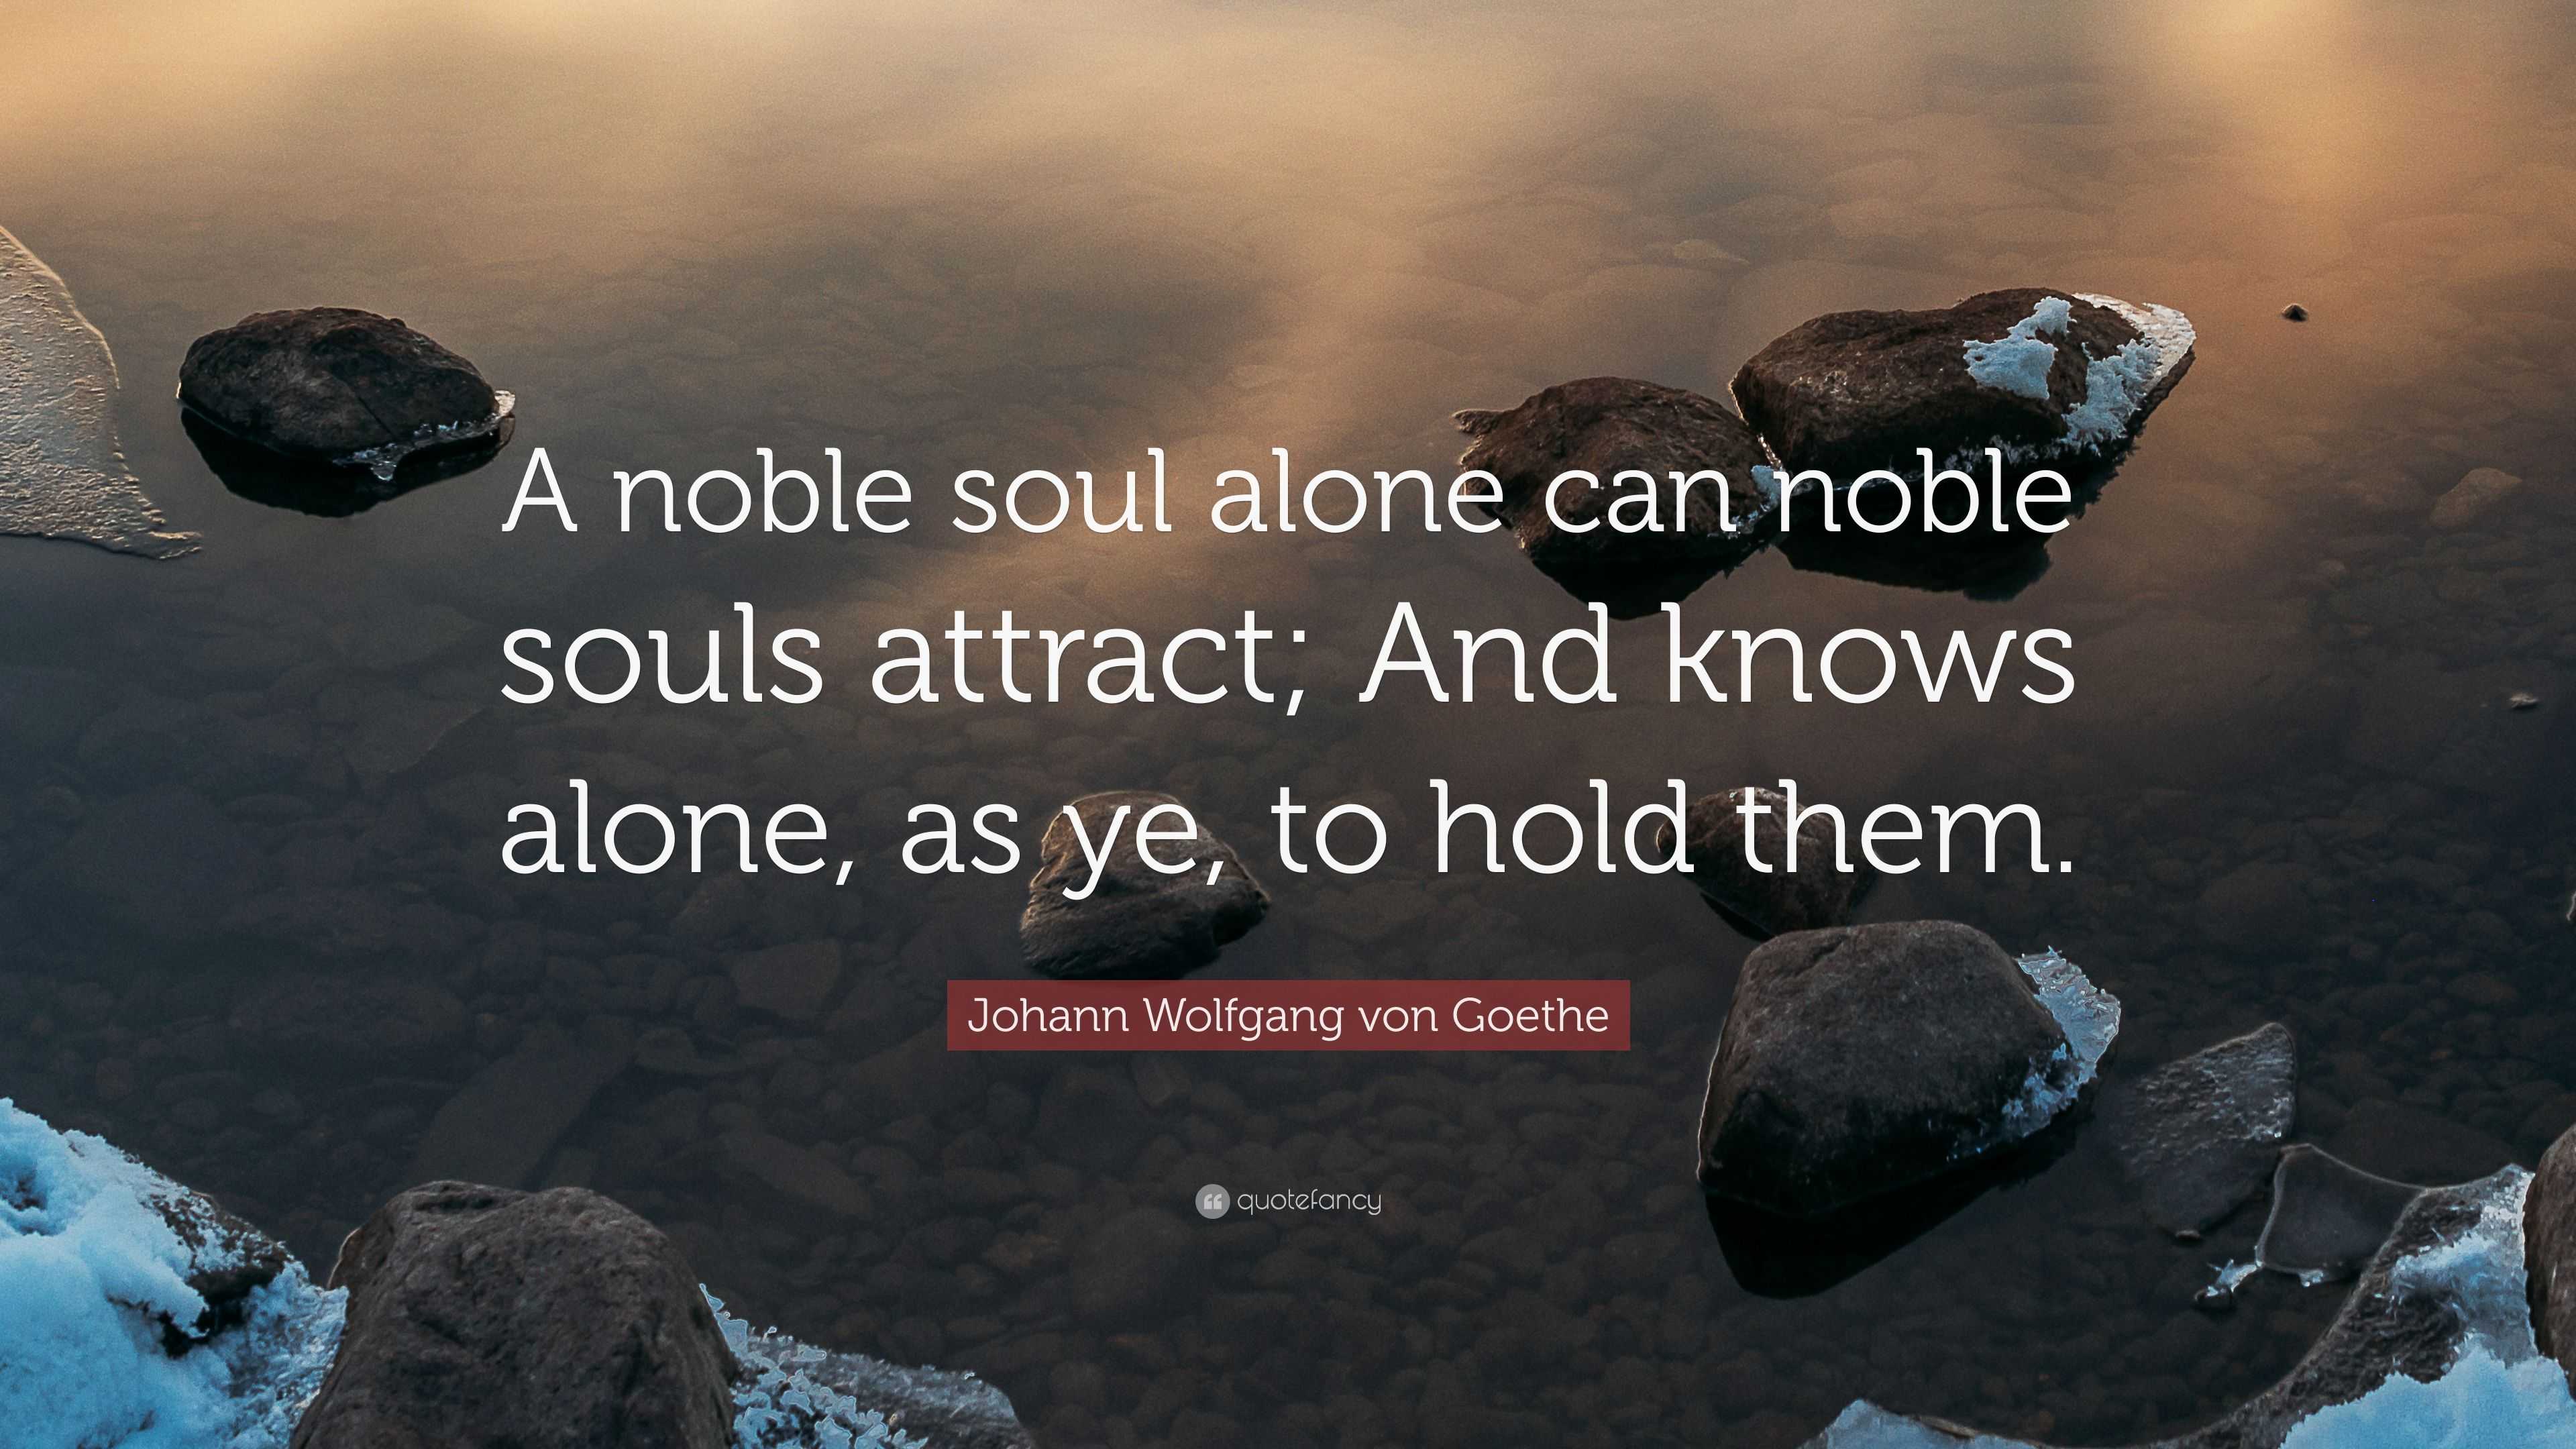 Johann Wolfgang von Goethe Quote: “A noble soul alone can noble souls ...